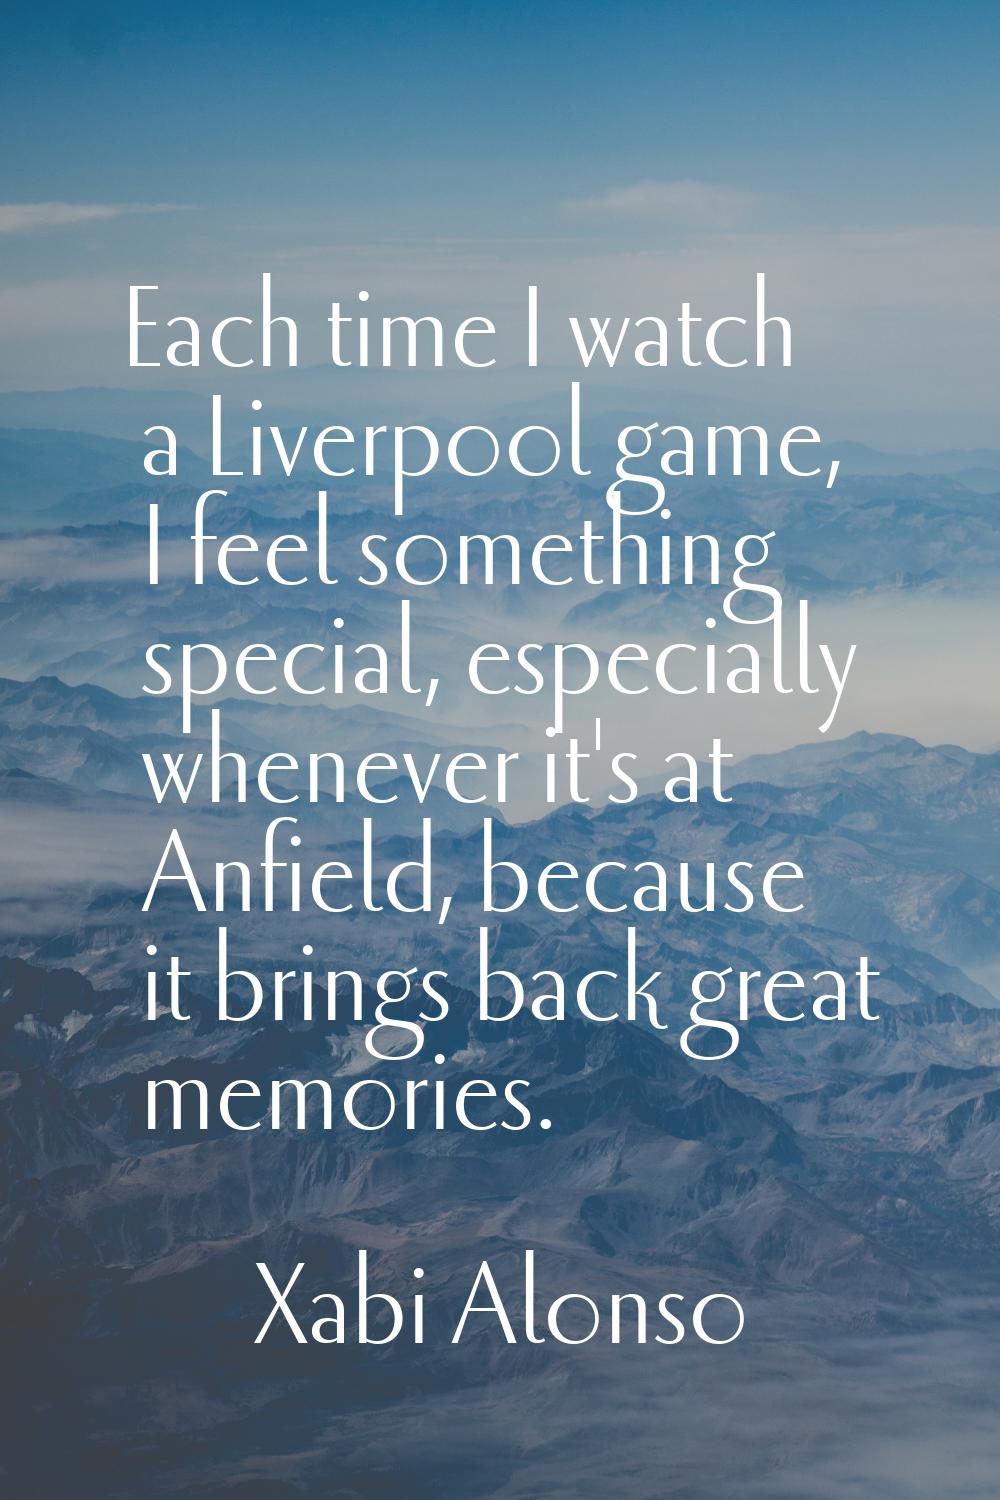 Each time I watch a Liverpool game, I feel something special, especially whenever it's at Anfield, 